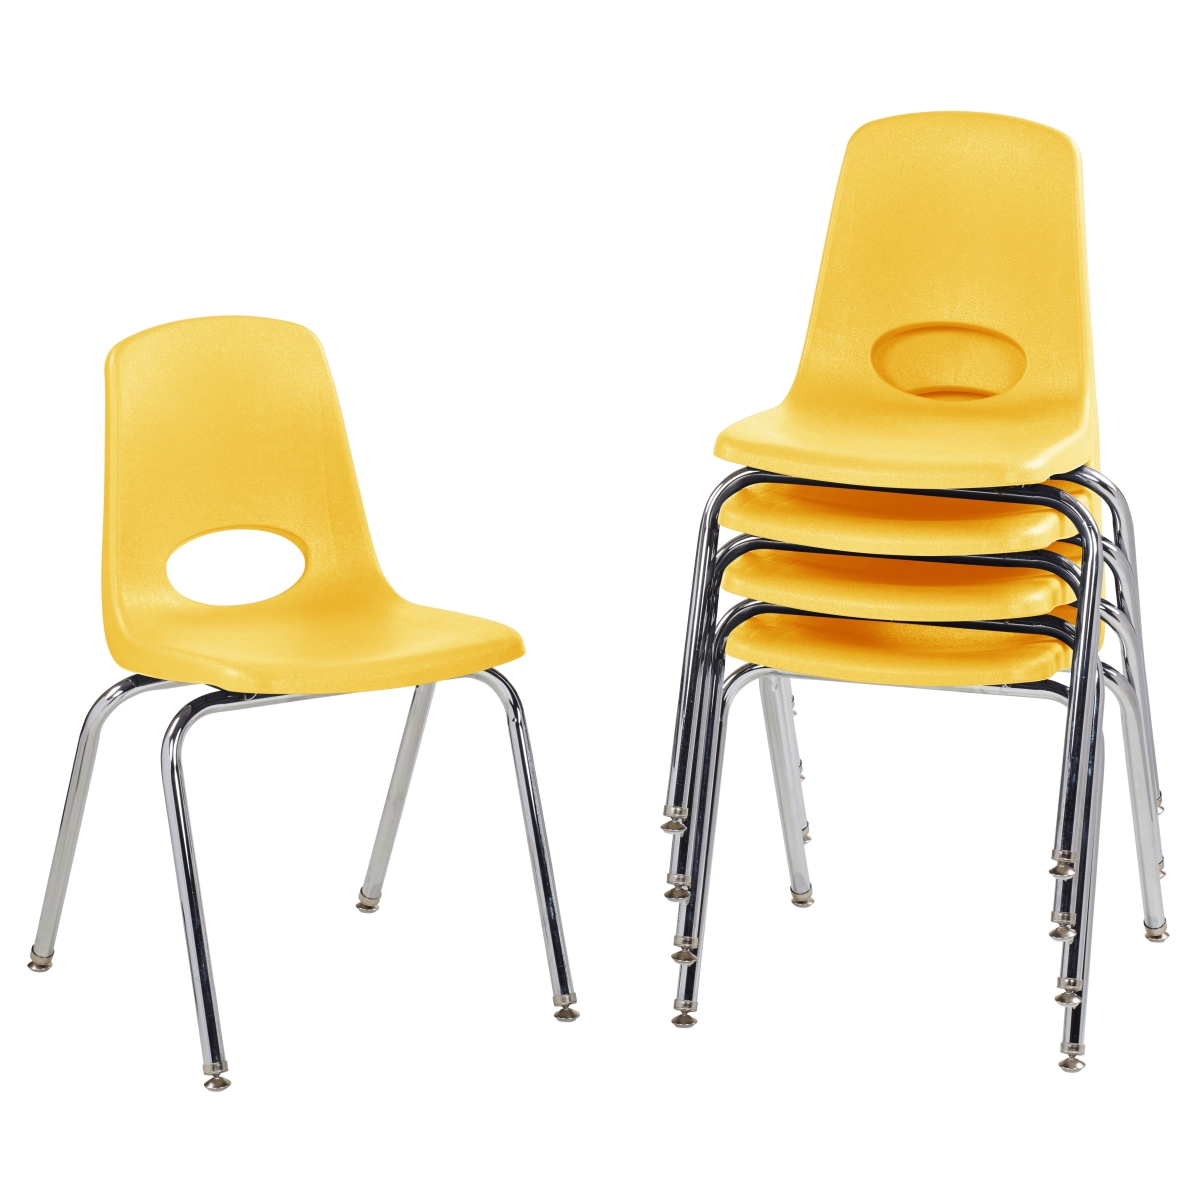 10371-ye 18 In. Stack Chair With Swivel Glide - Yellow - Pack Of 5